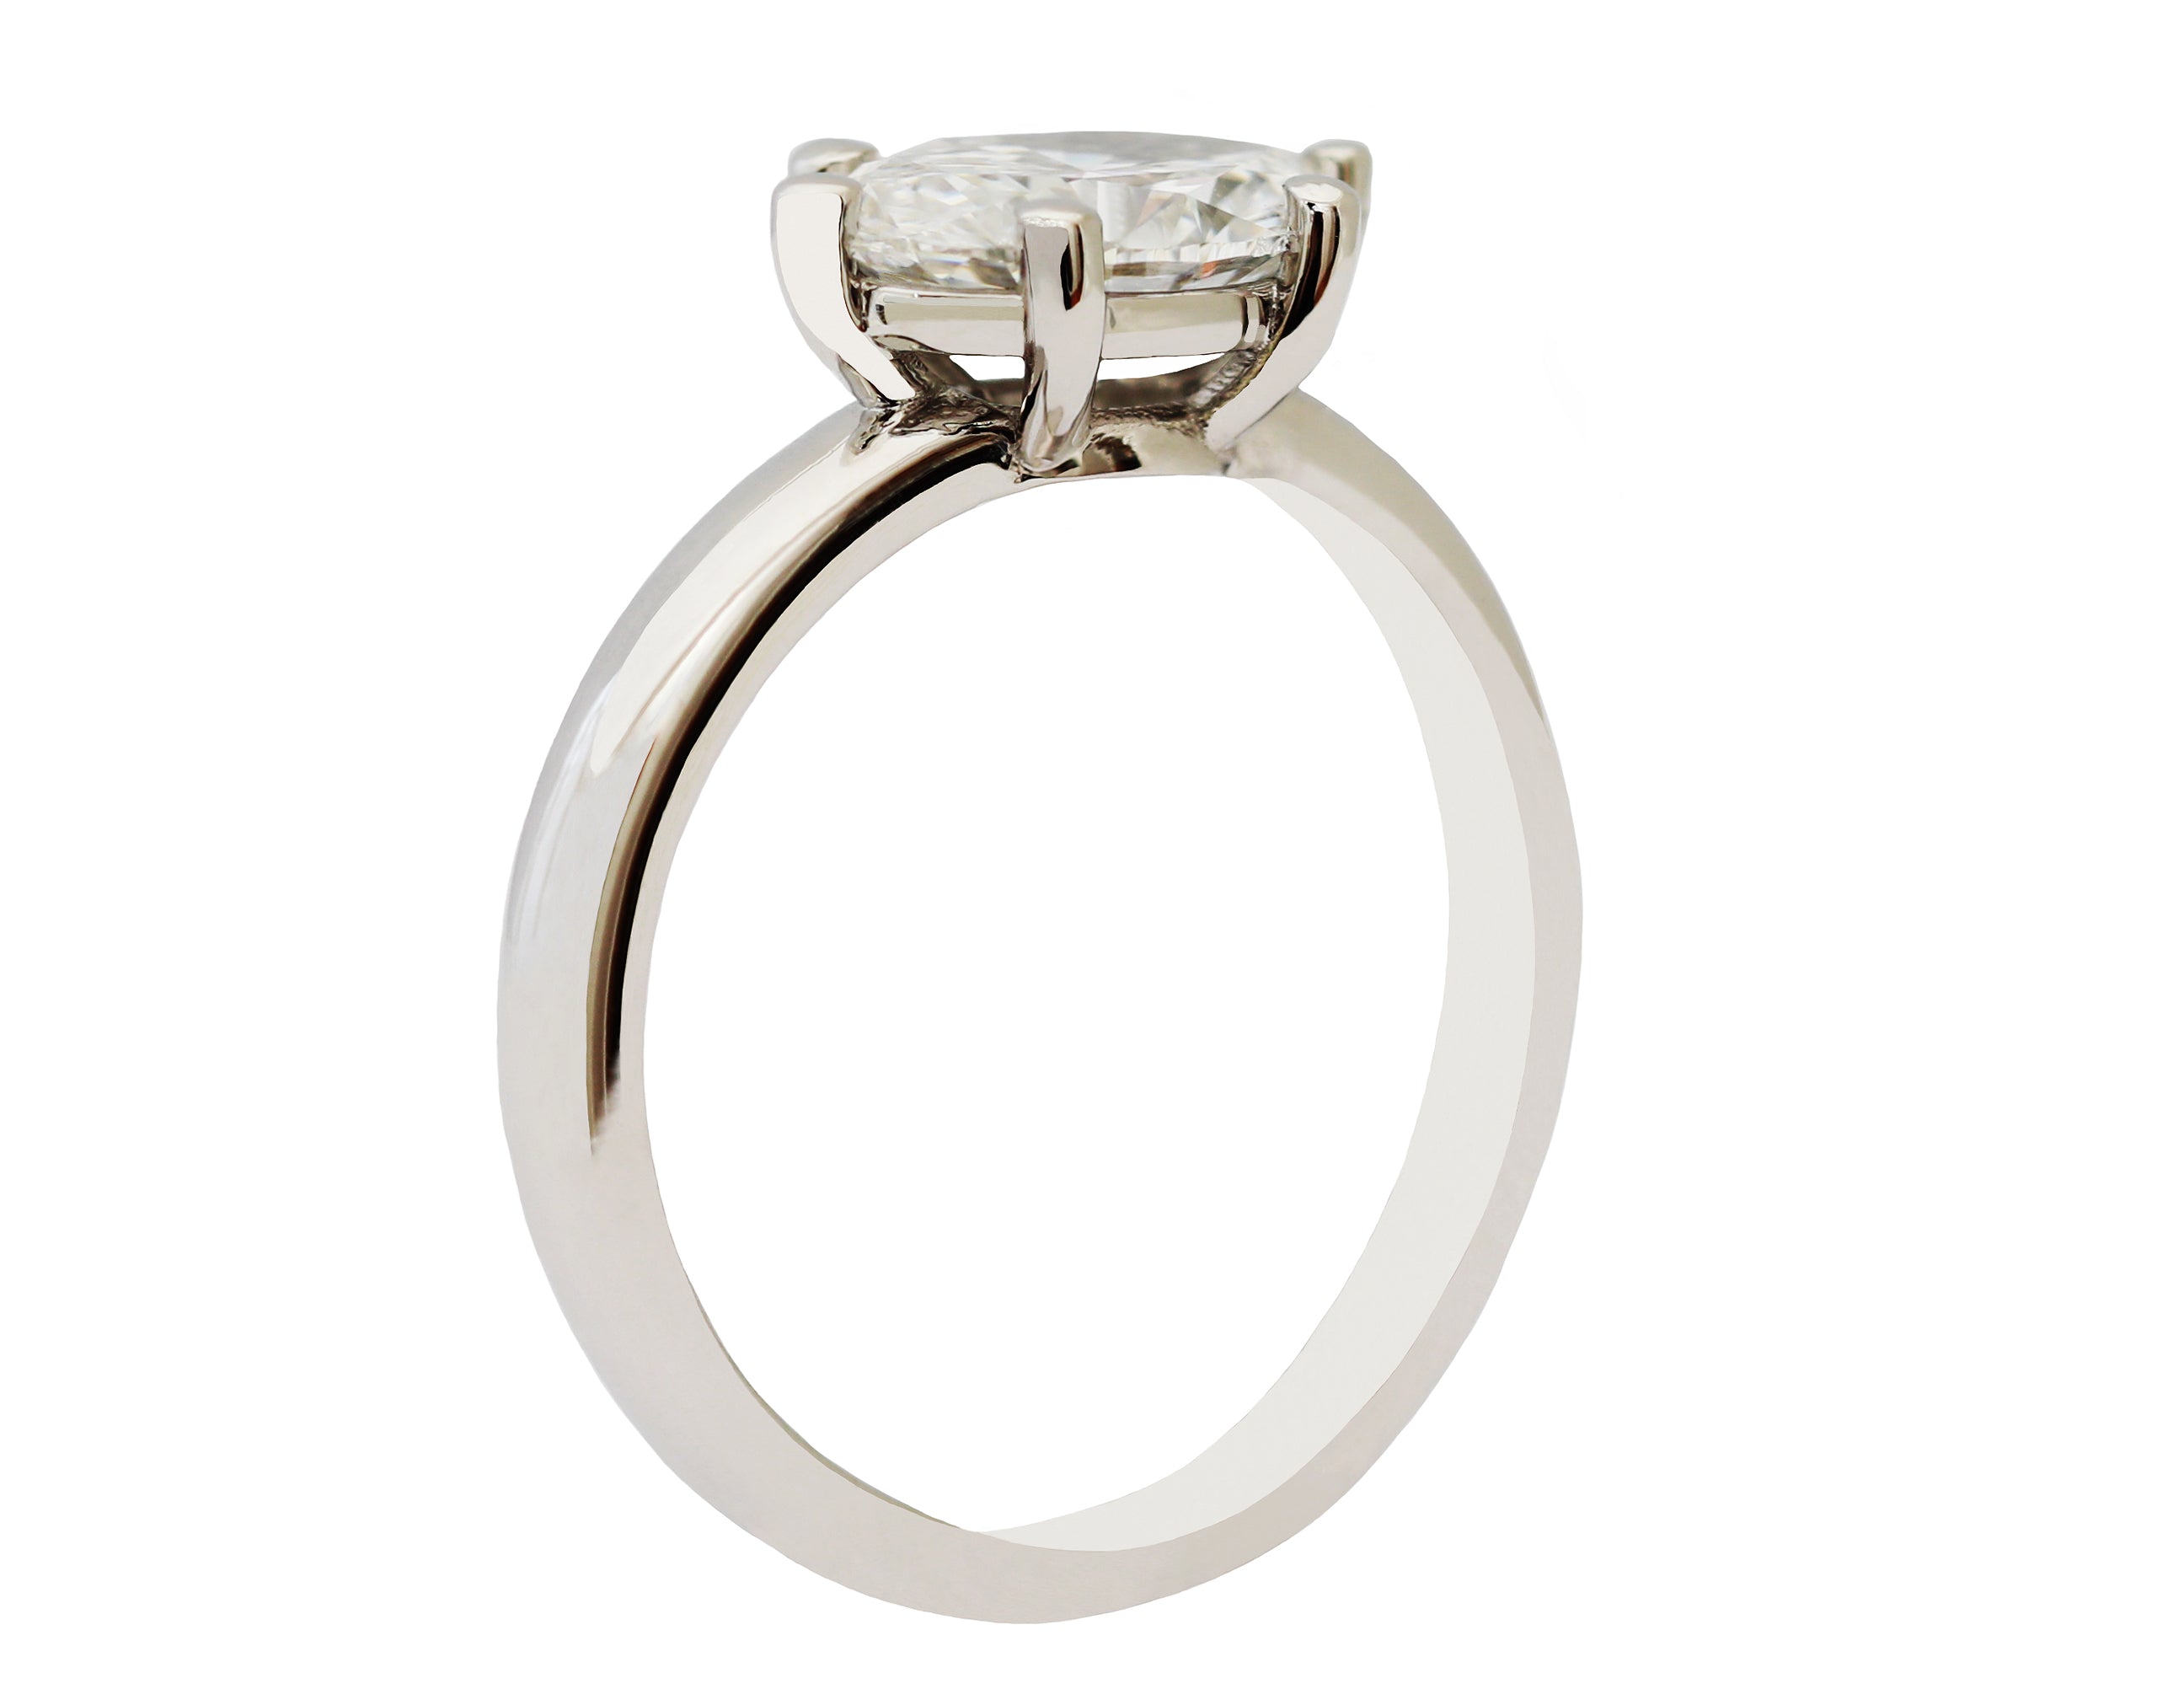 1 Carat East-West Oval Diamond Ring with 6 Prongs